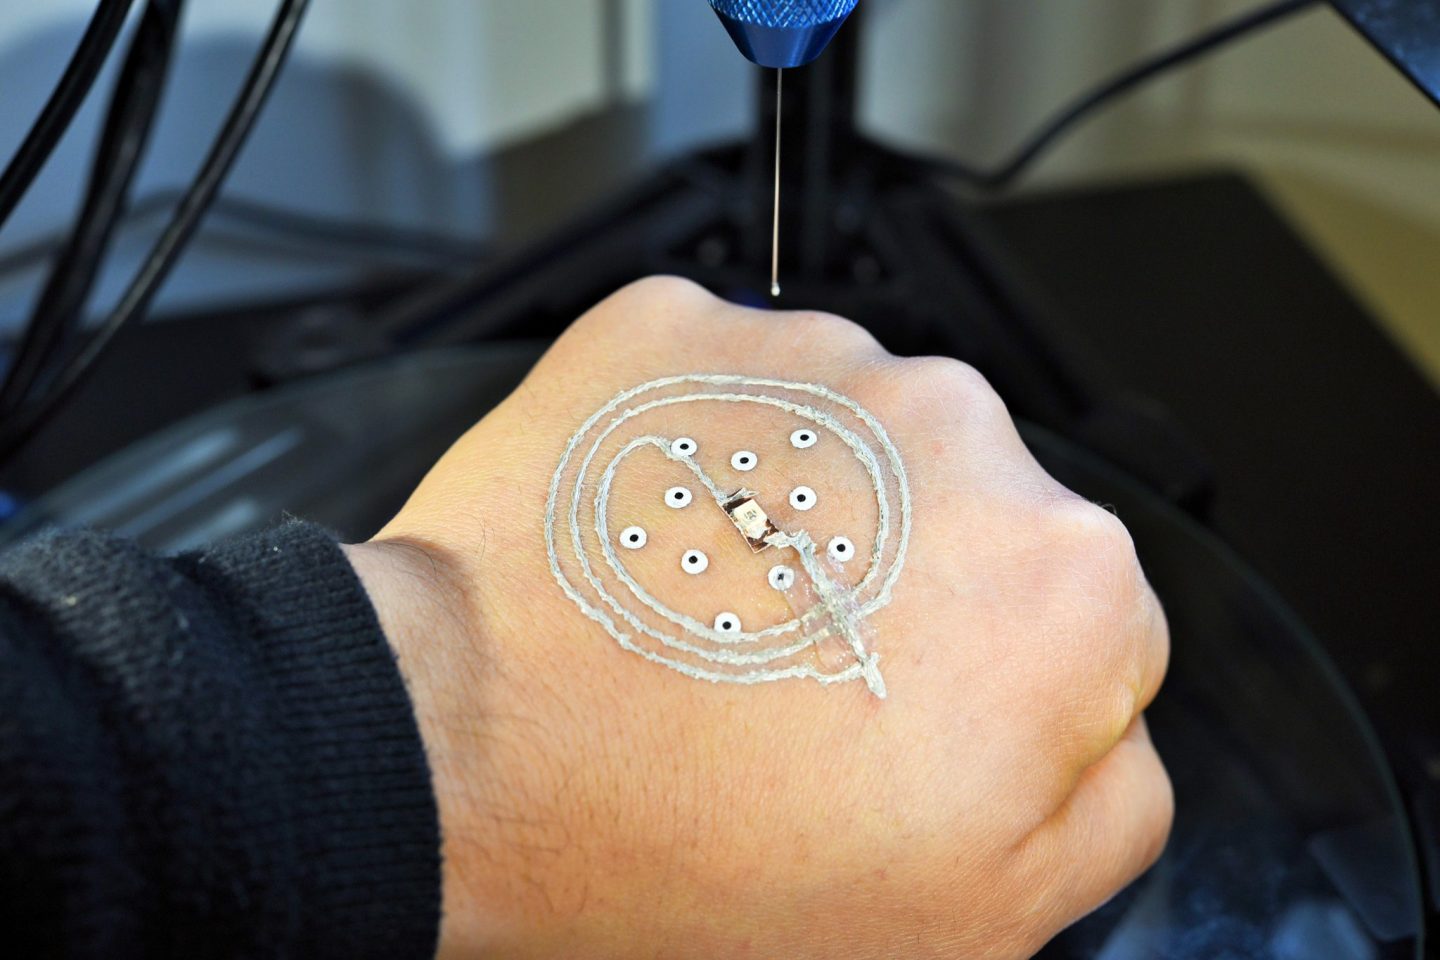 A new technique can print circuits and biological cells directly onto skin.